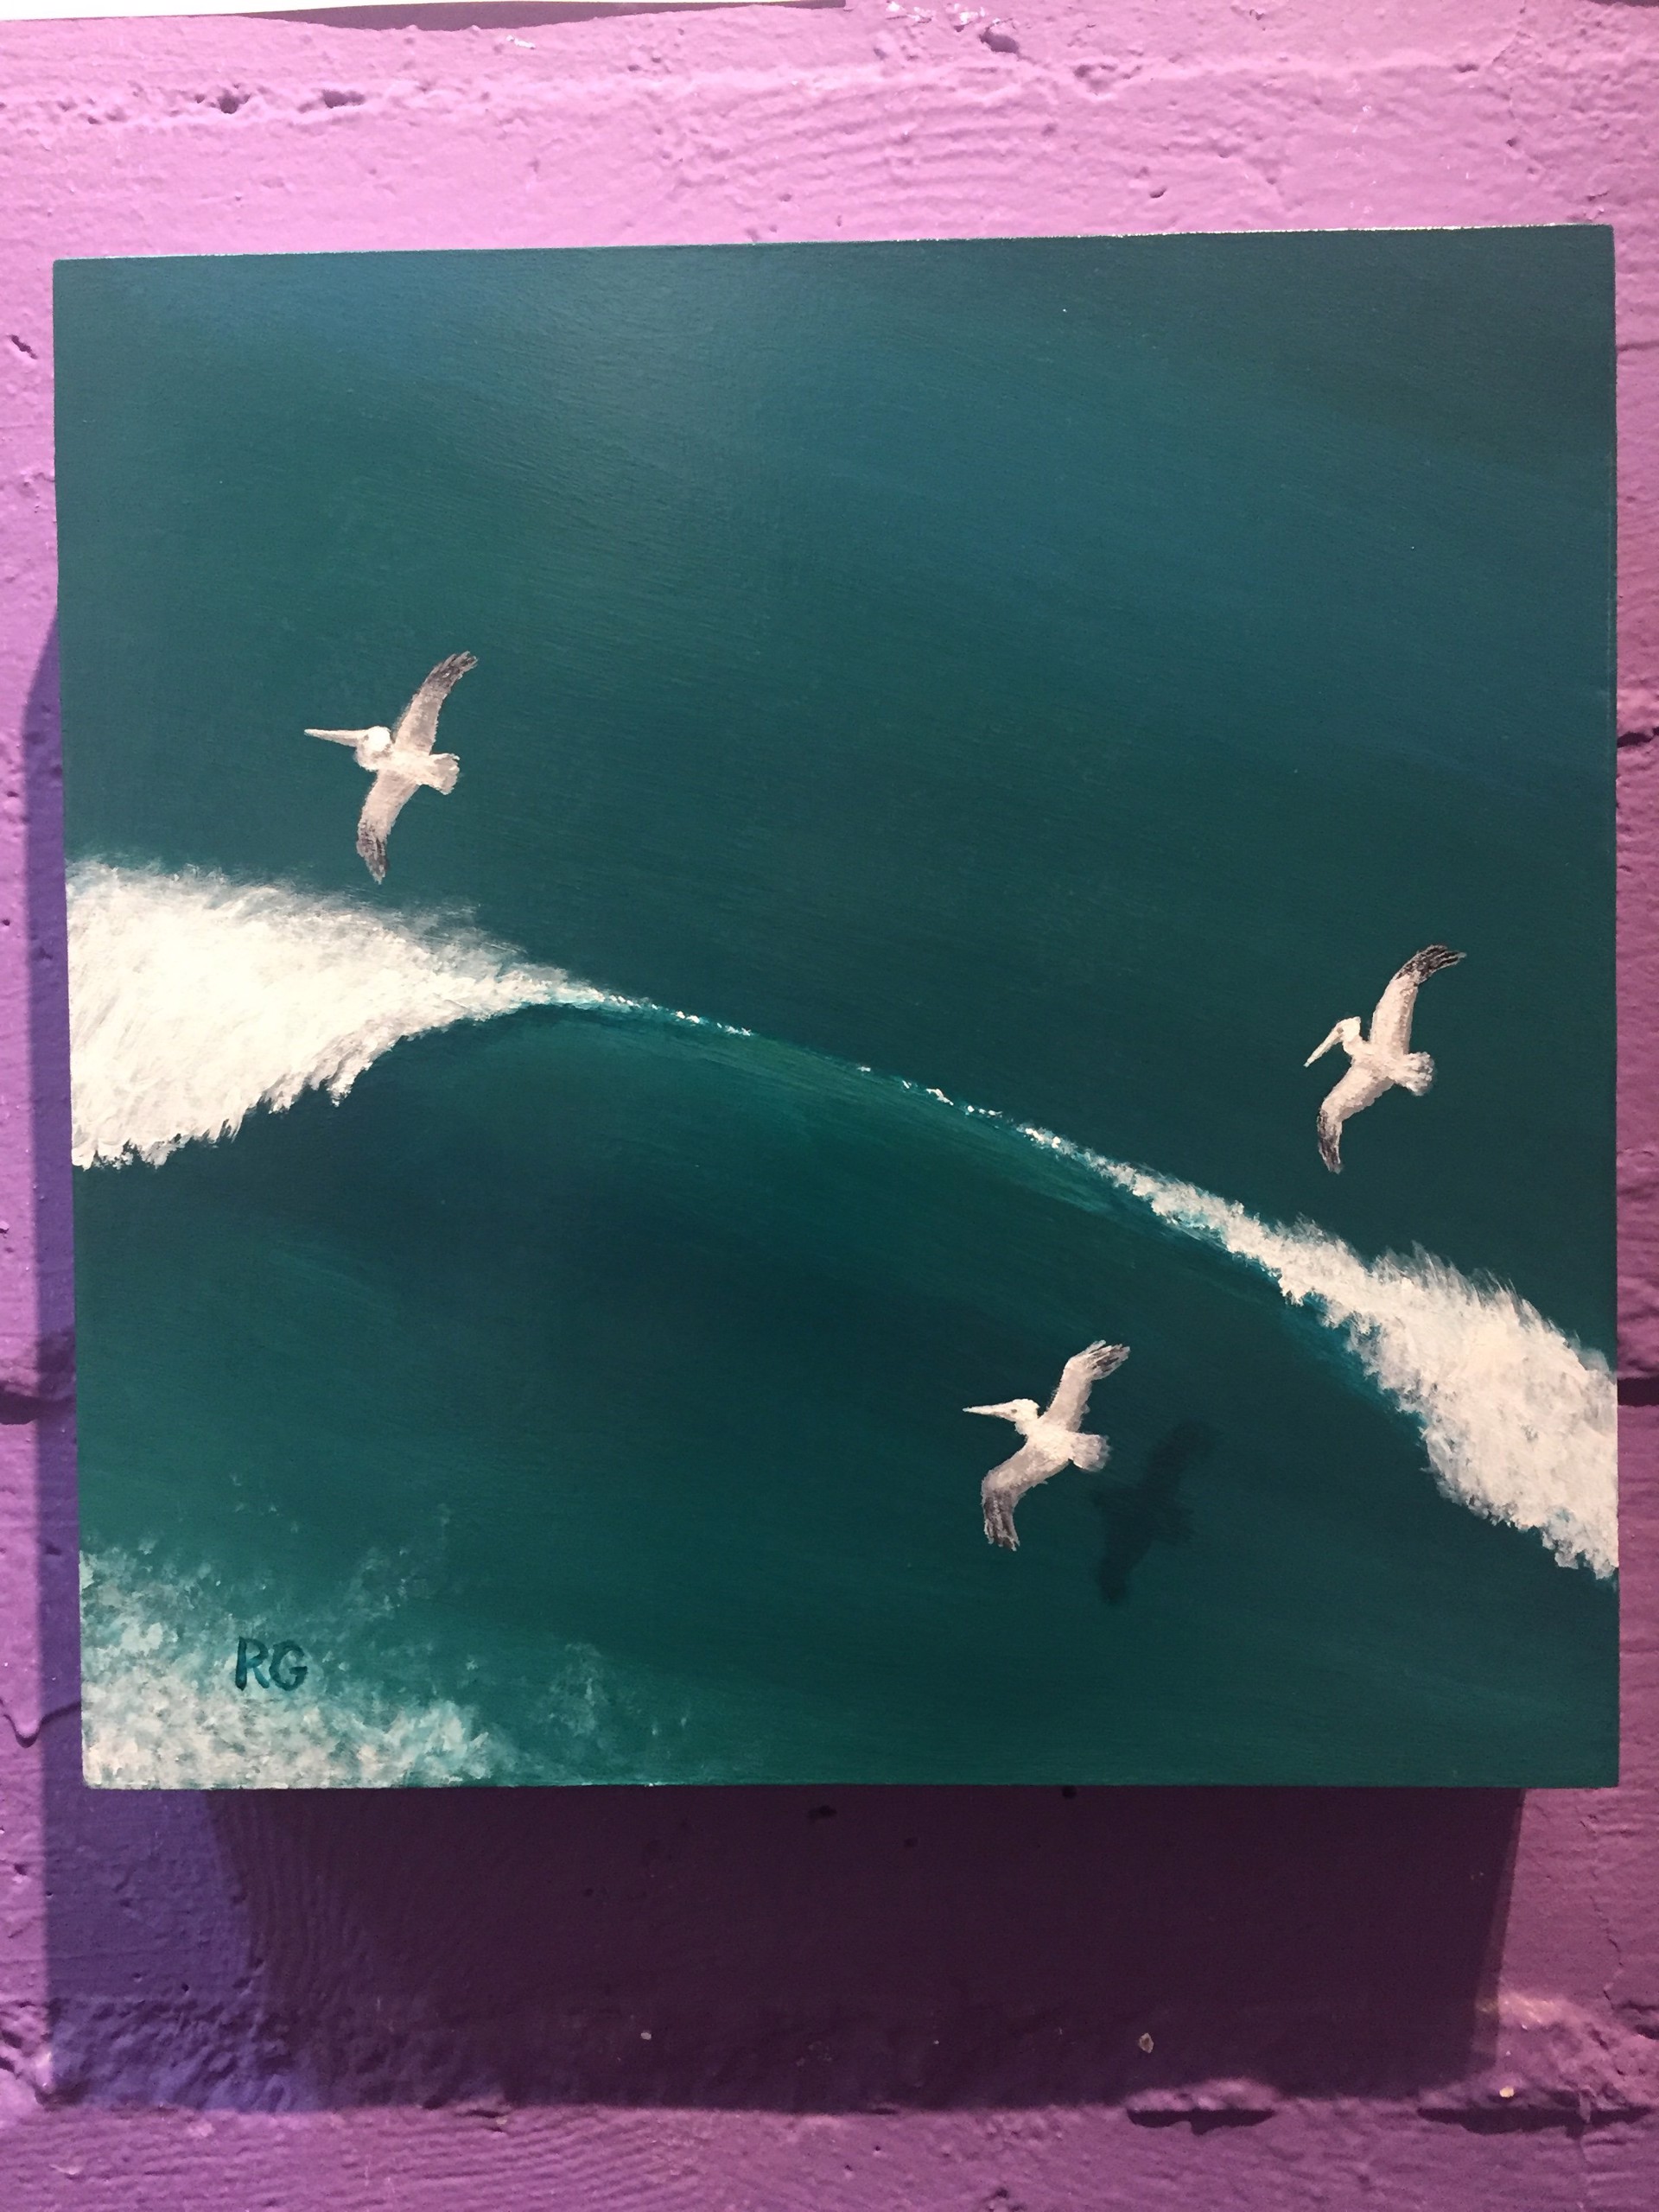 Coastal Pelicans in Surf by Ray Guichard